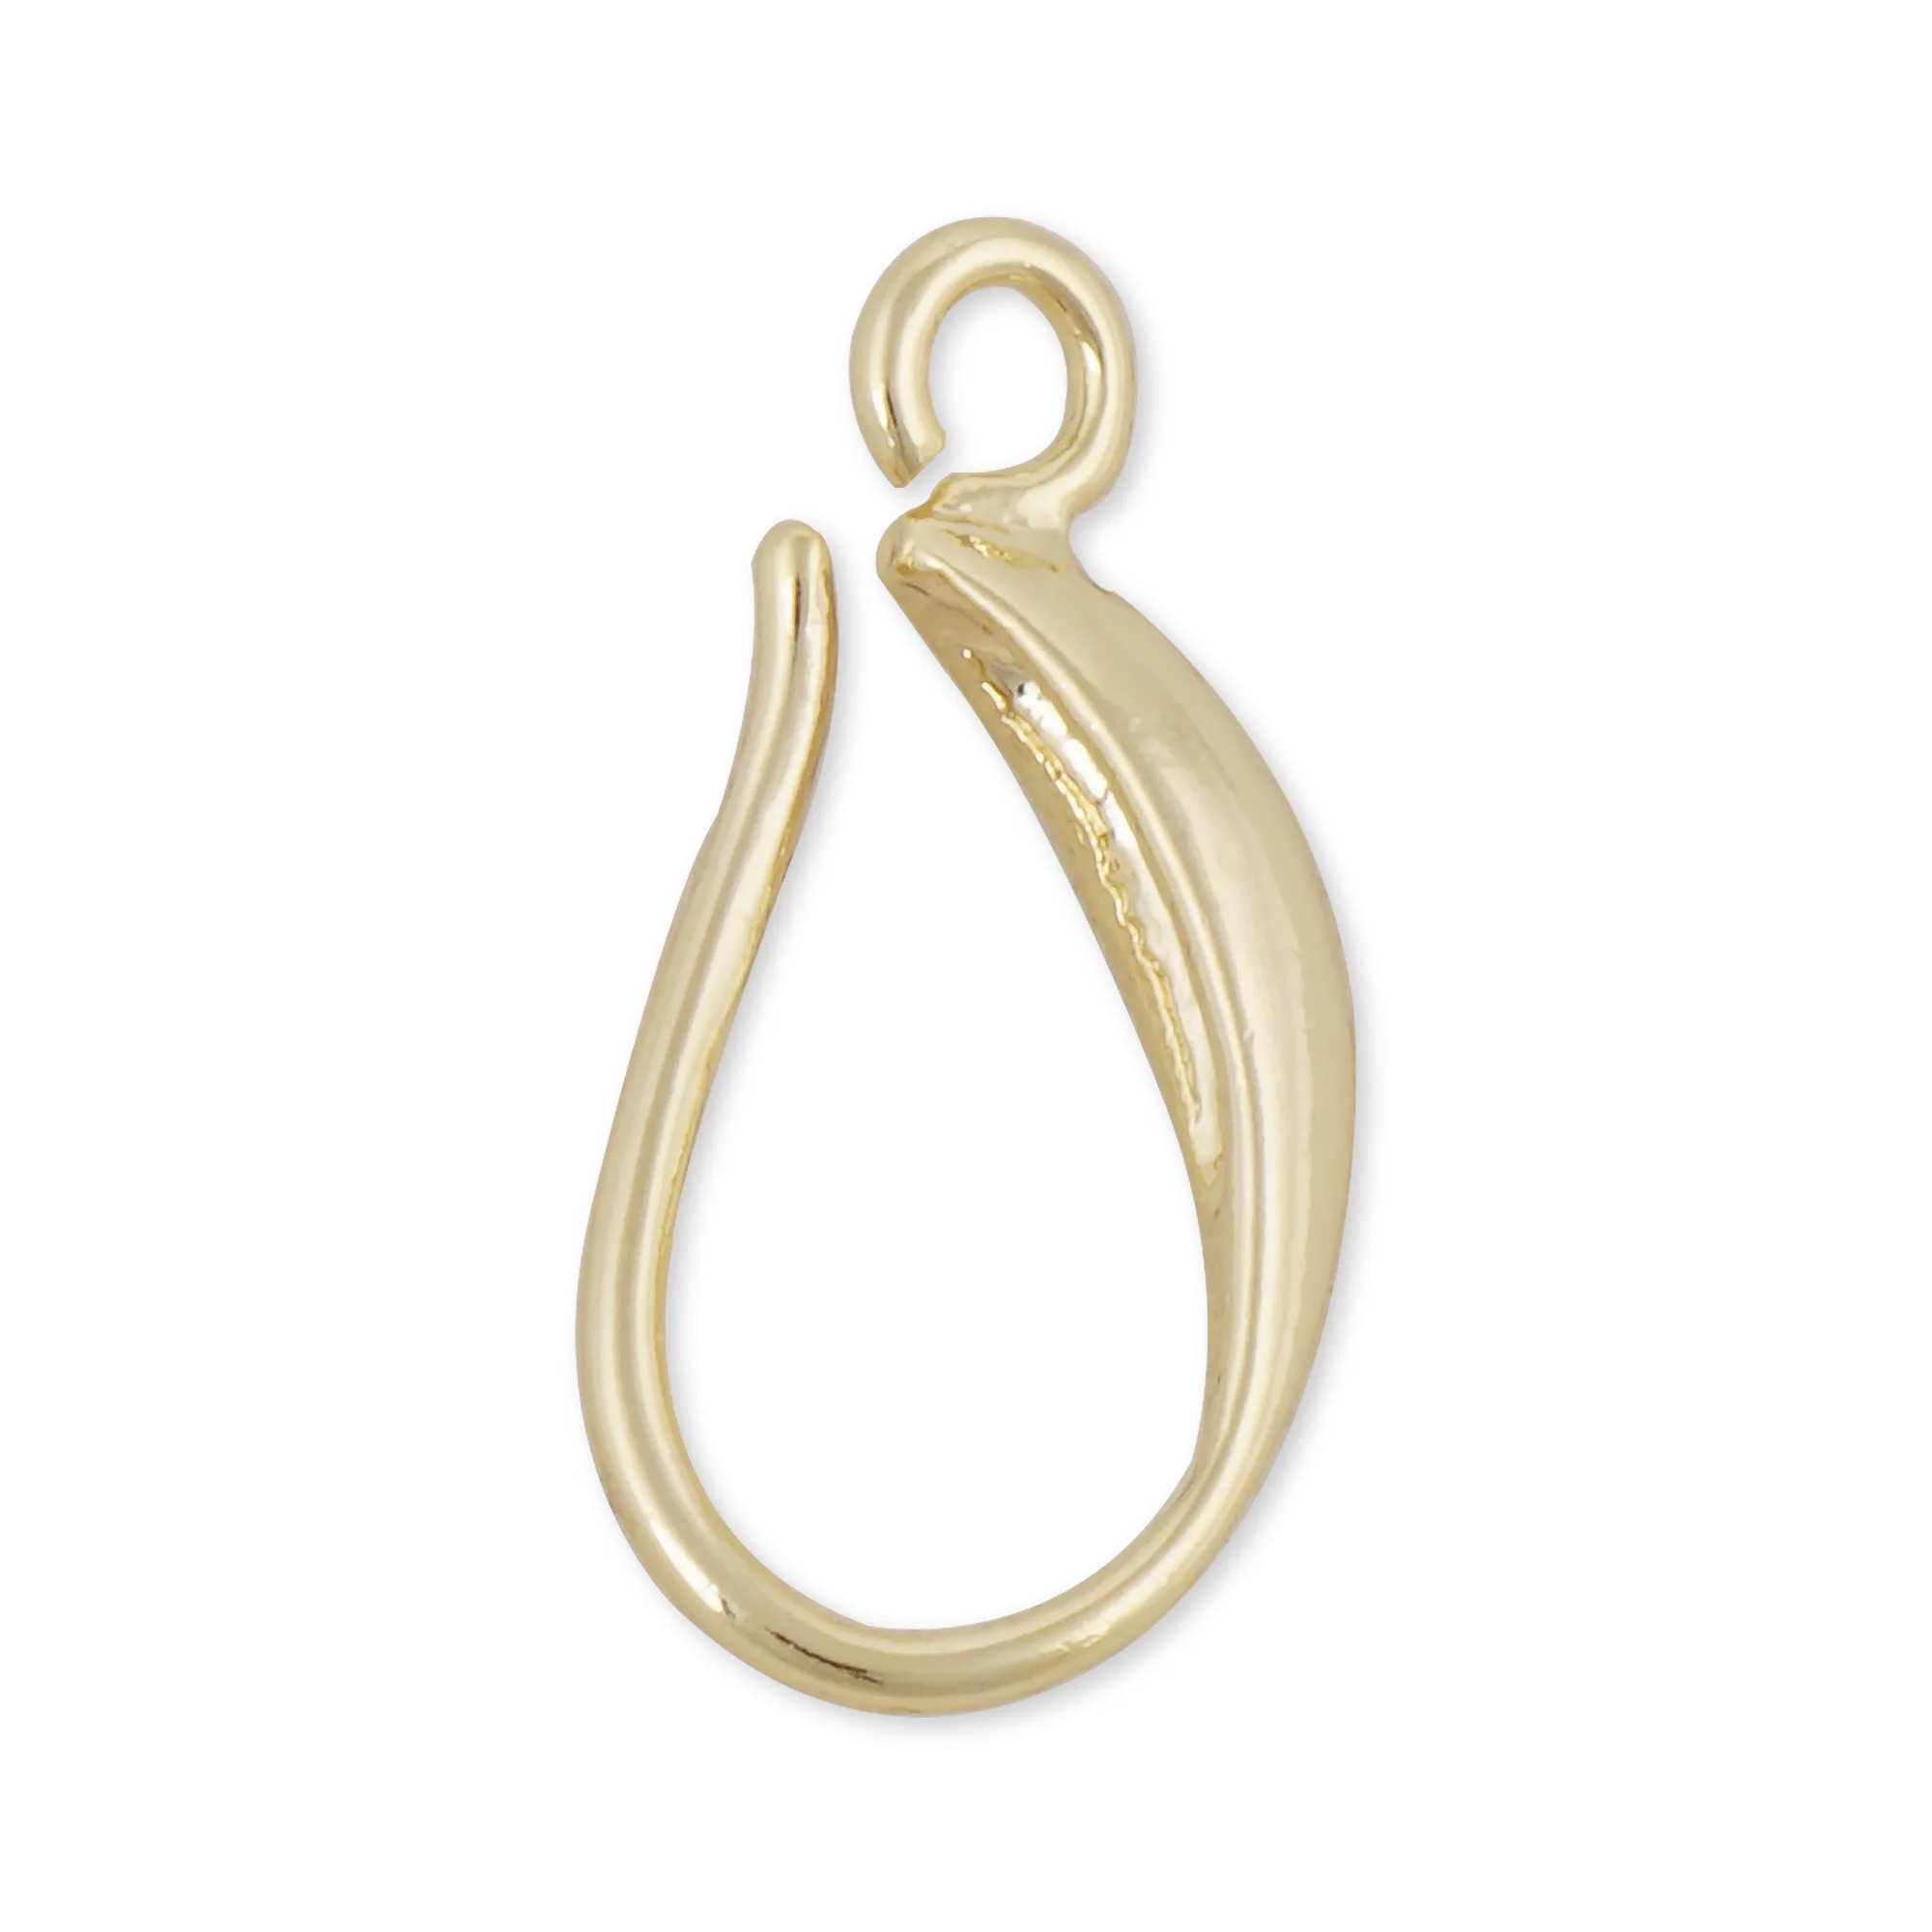 9ct Gold Plated Wire For Jewellery Making